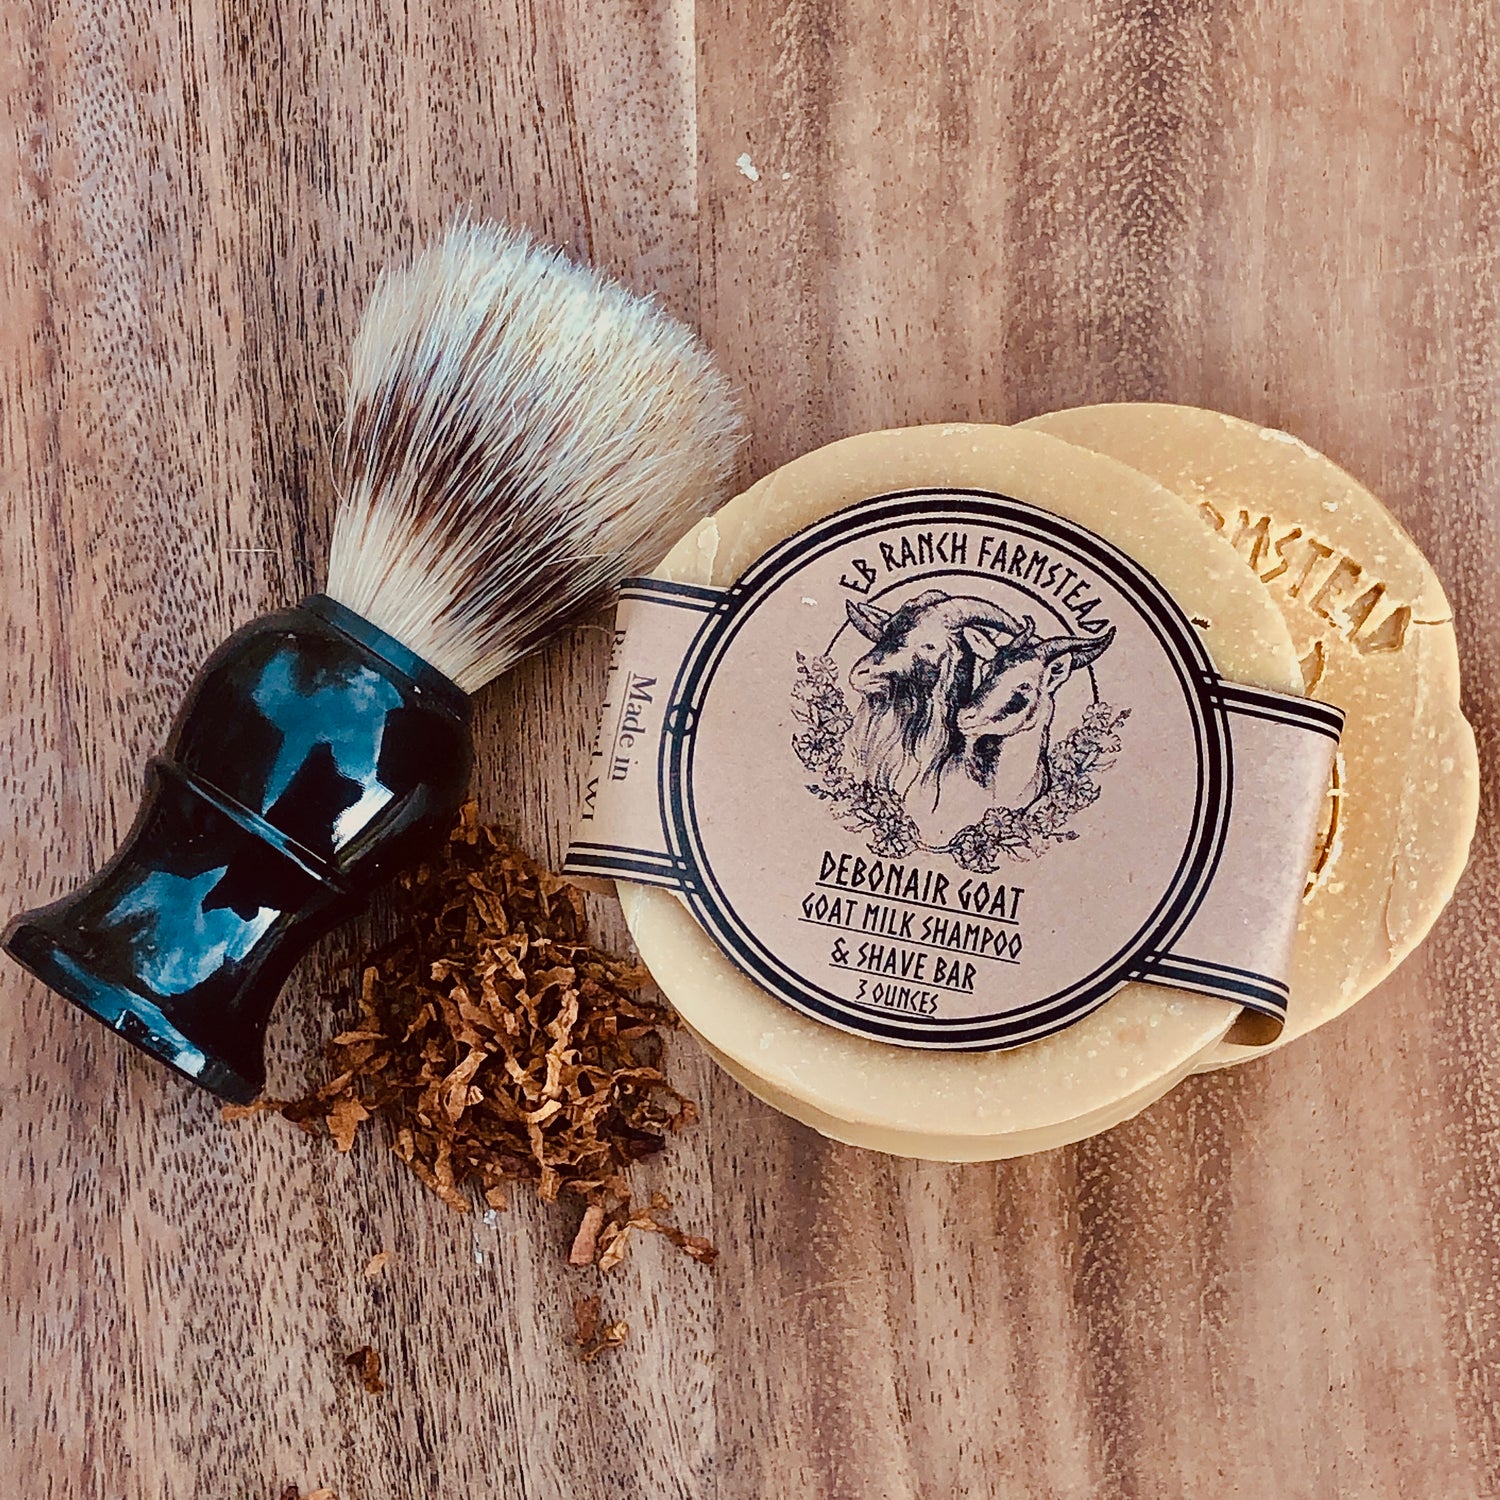 Shampoo & Shave Bars And More!